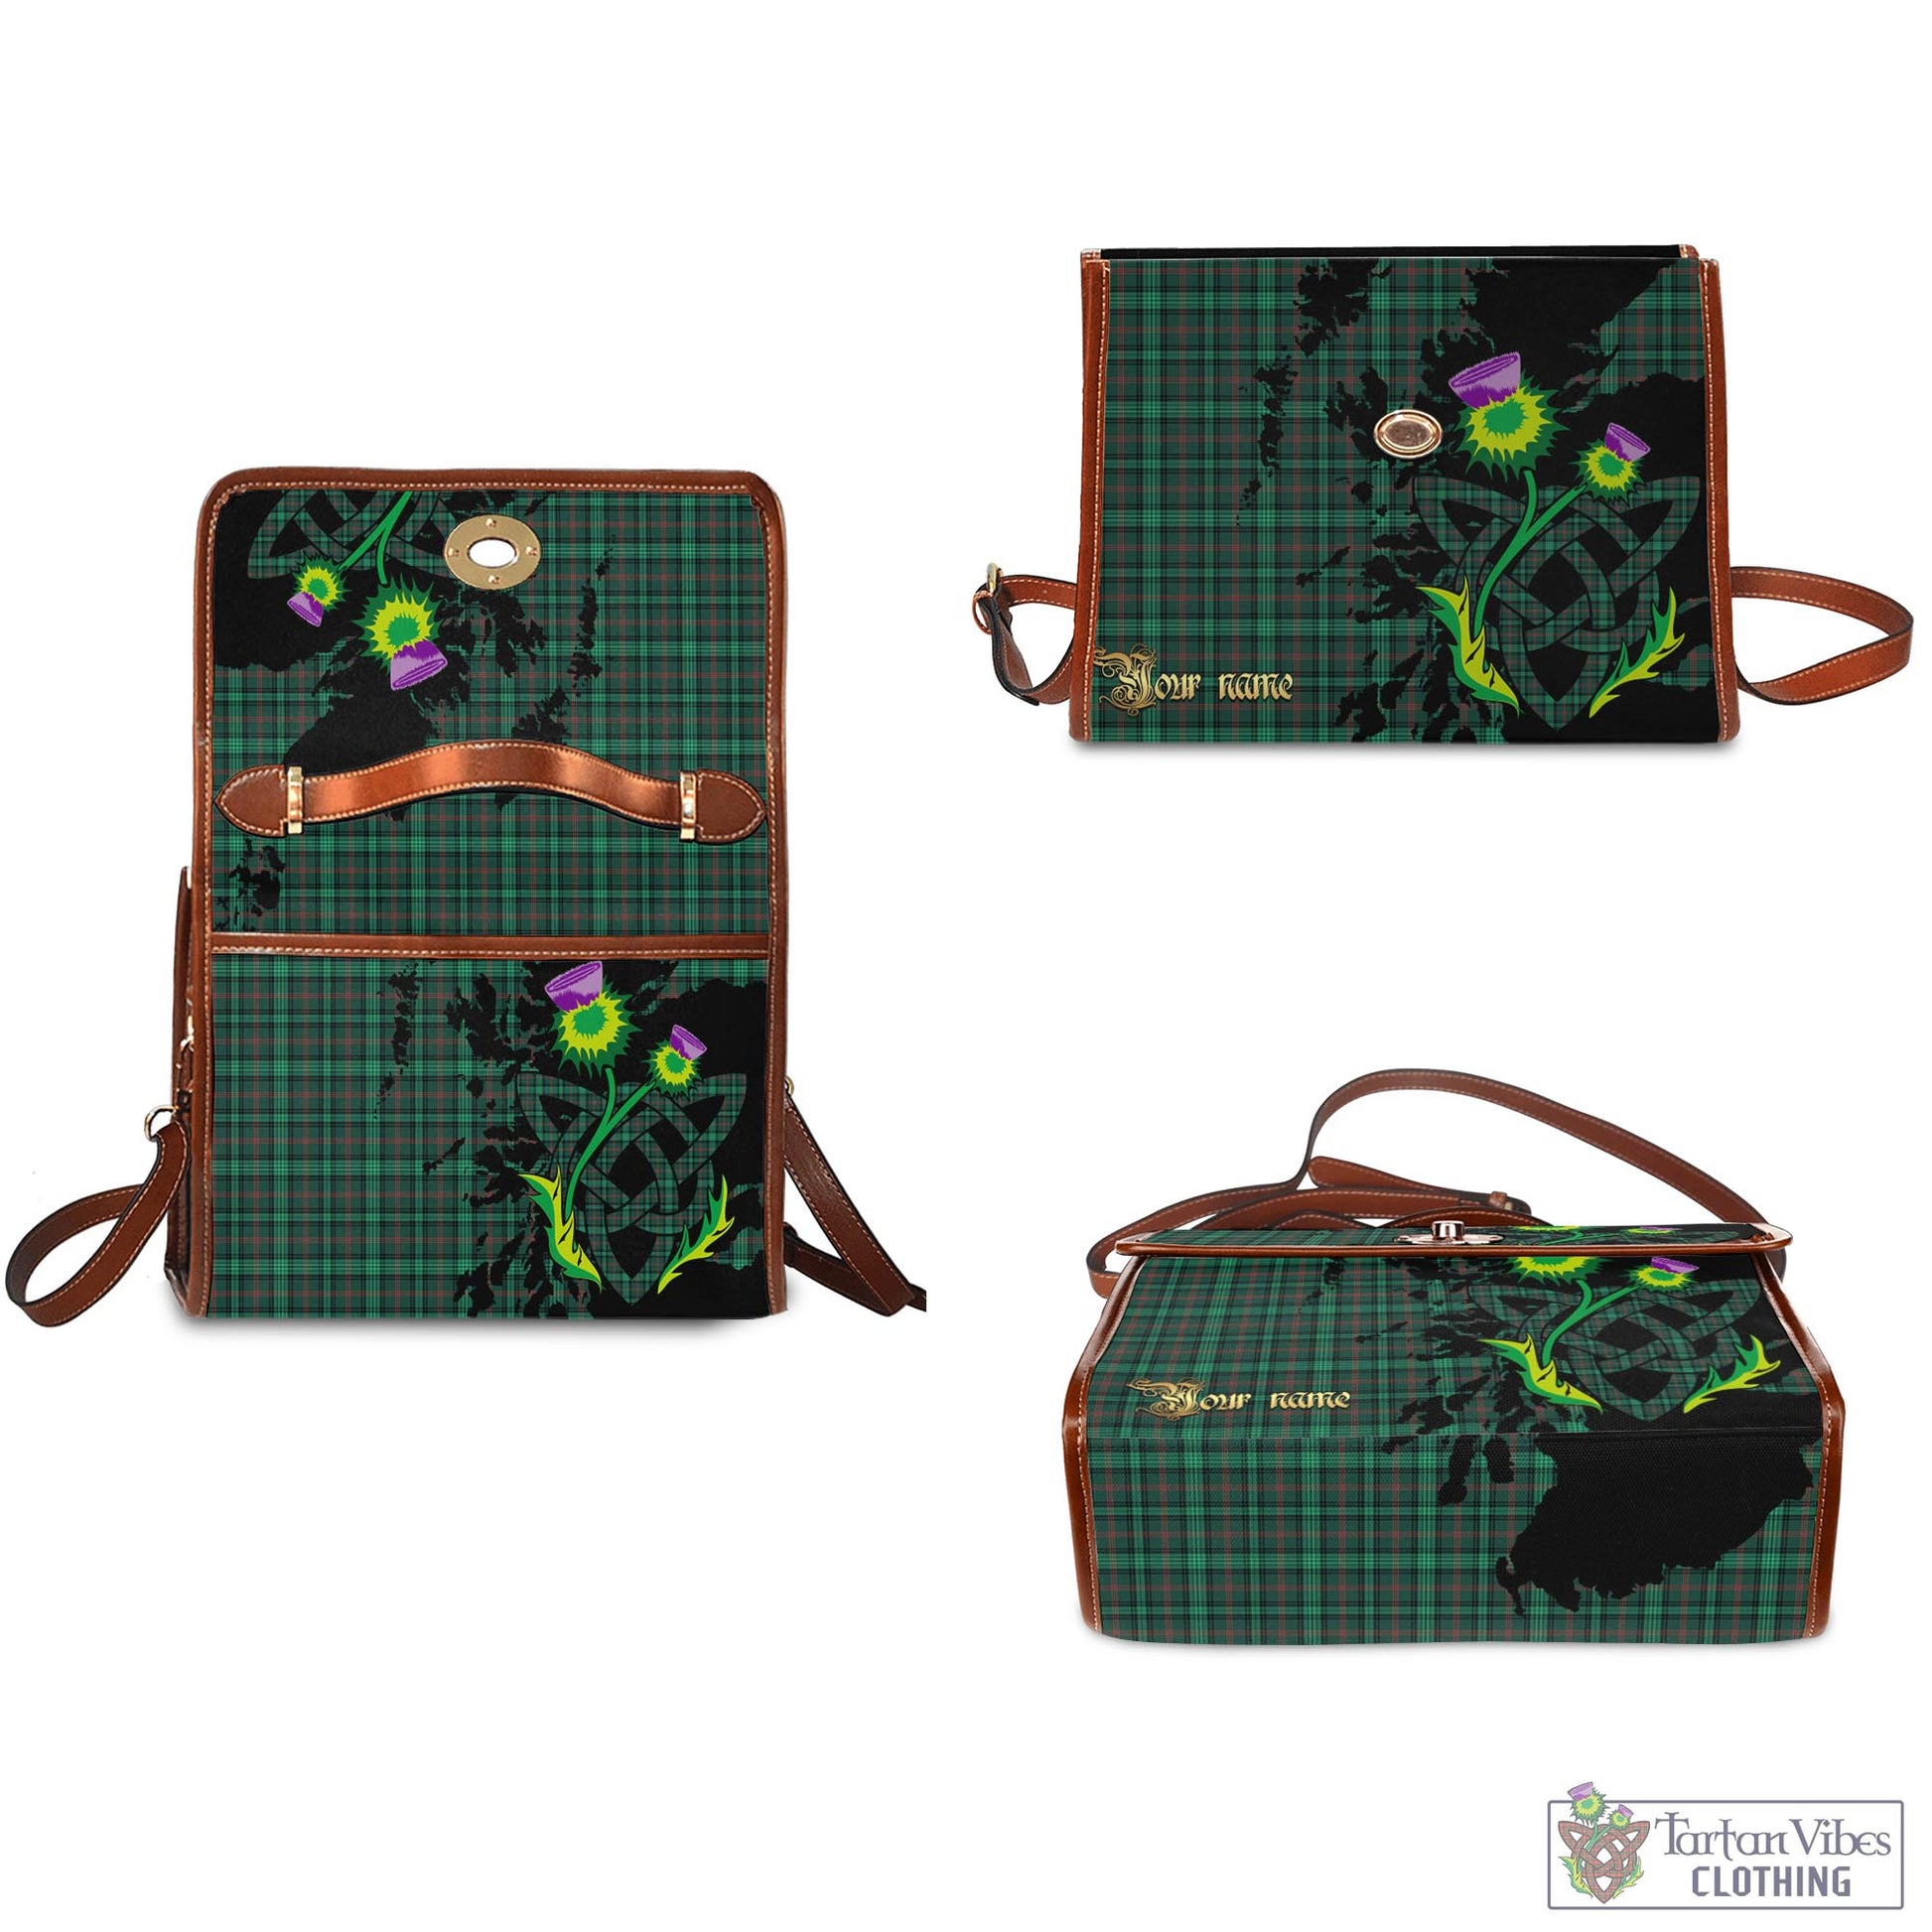 Tartan Vibes Clothing Ross Hunting Modern Tartan Waterproof Canvas Bag with Scotland Map and Thistle Celtic Accents